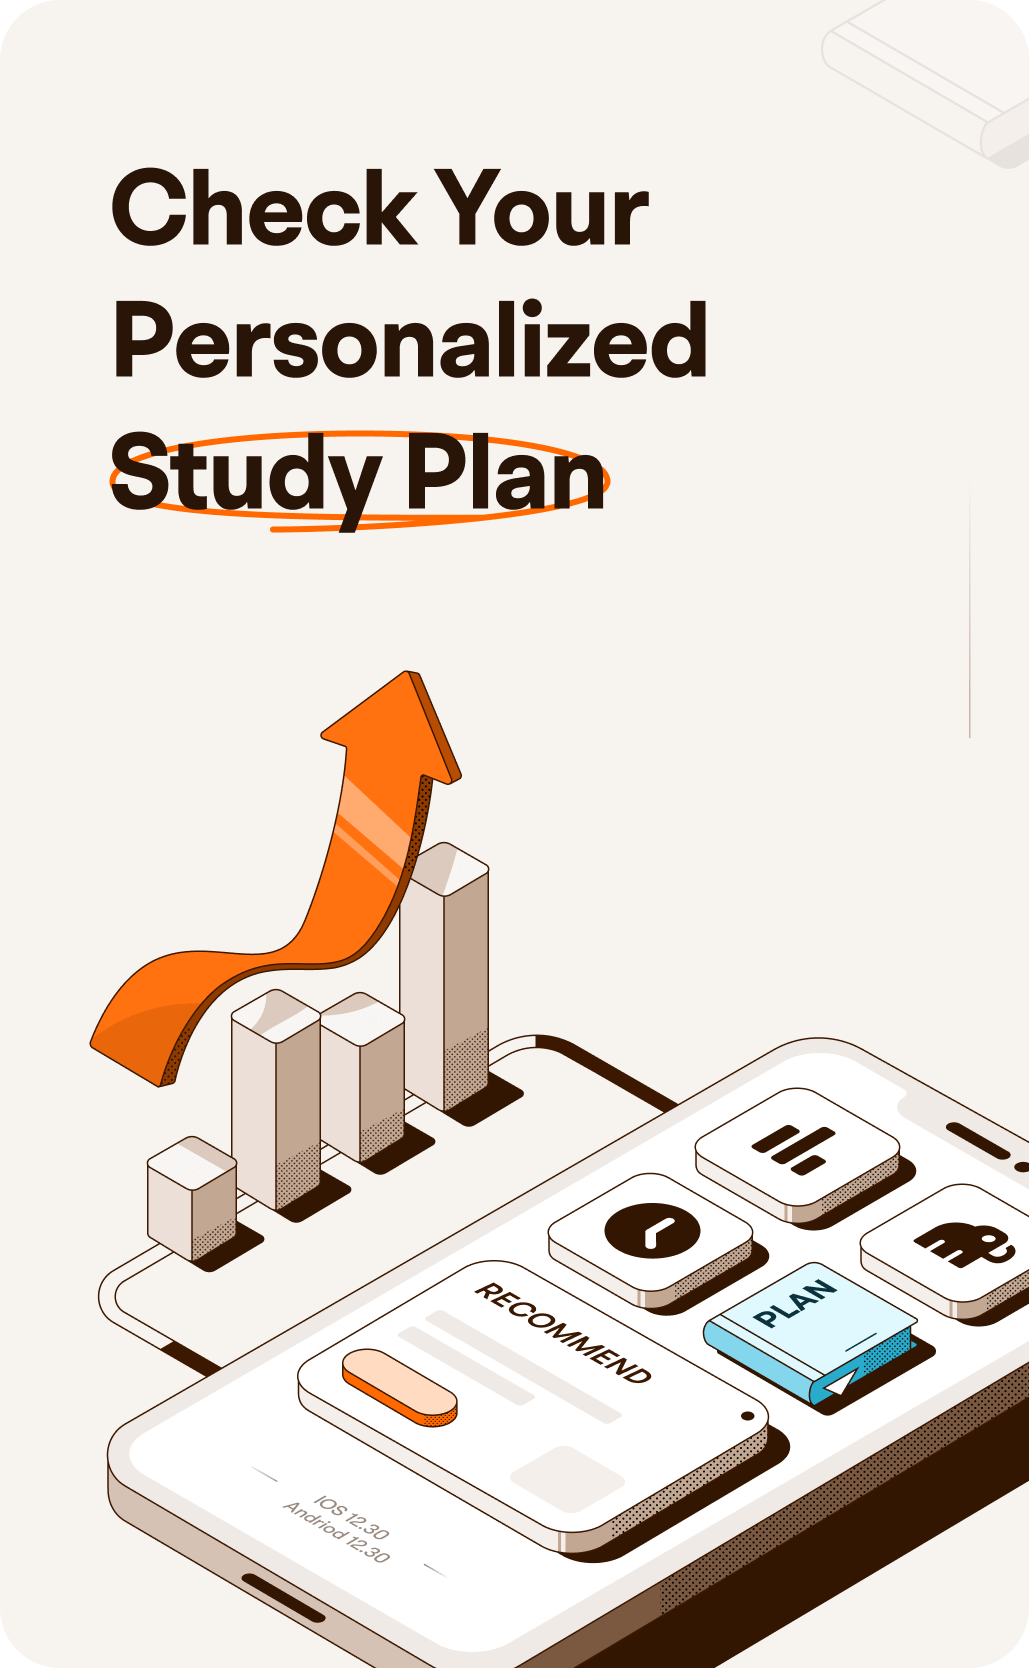 Check Your Personalized Study Plan, Get Equipped with Investing Knowledge